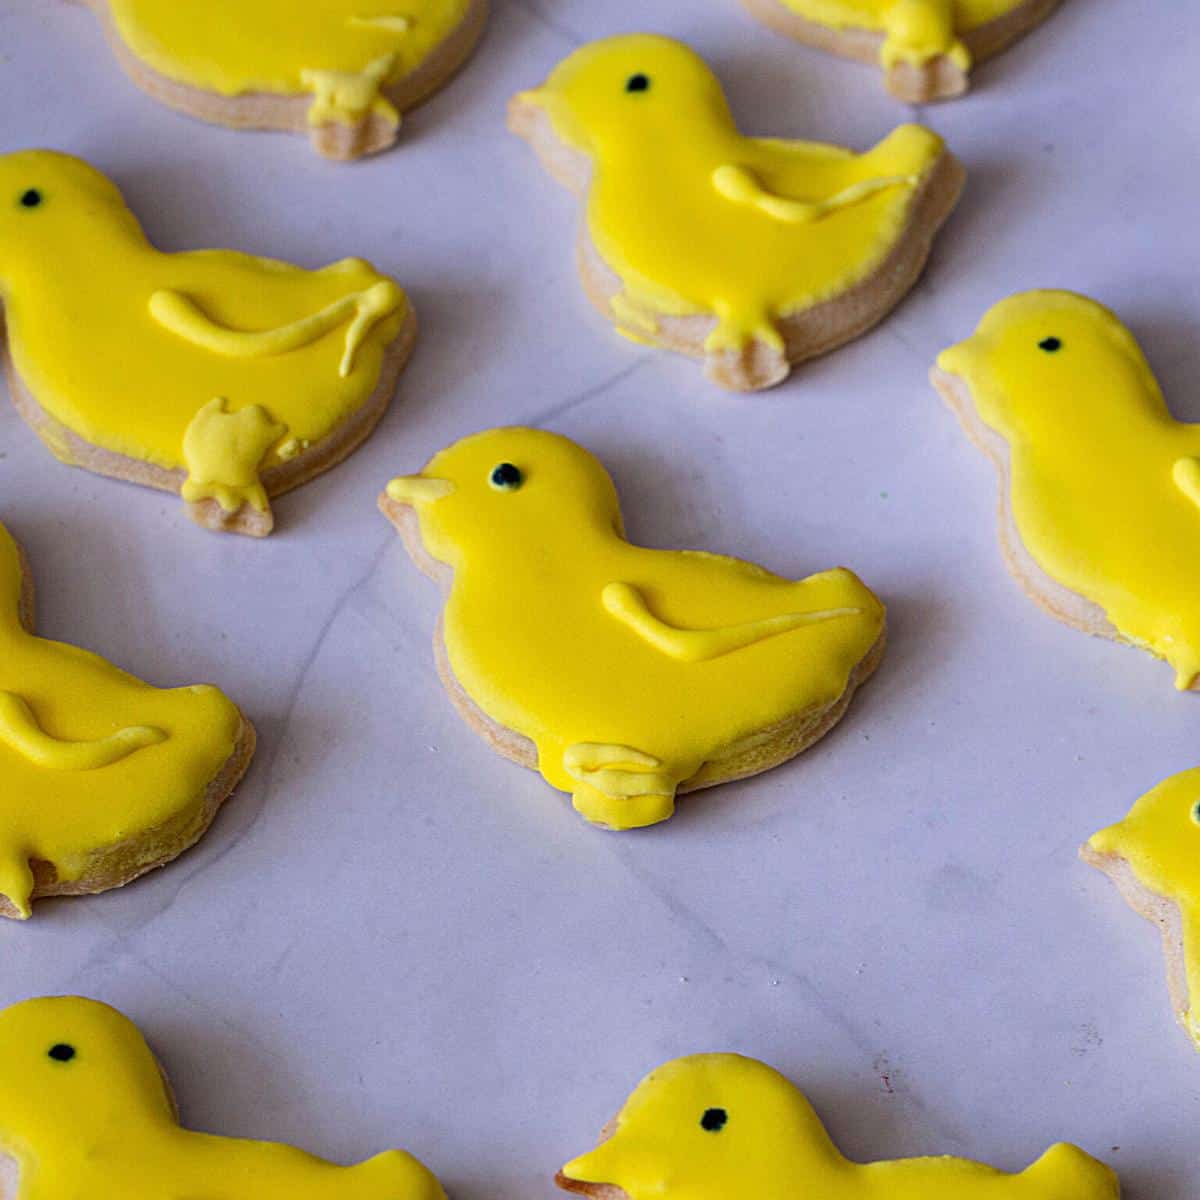 Yellow chick frosted cookies on the table.